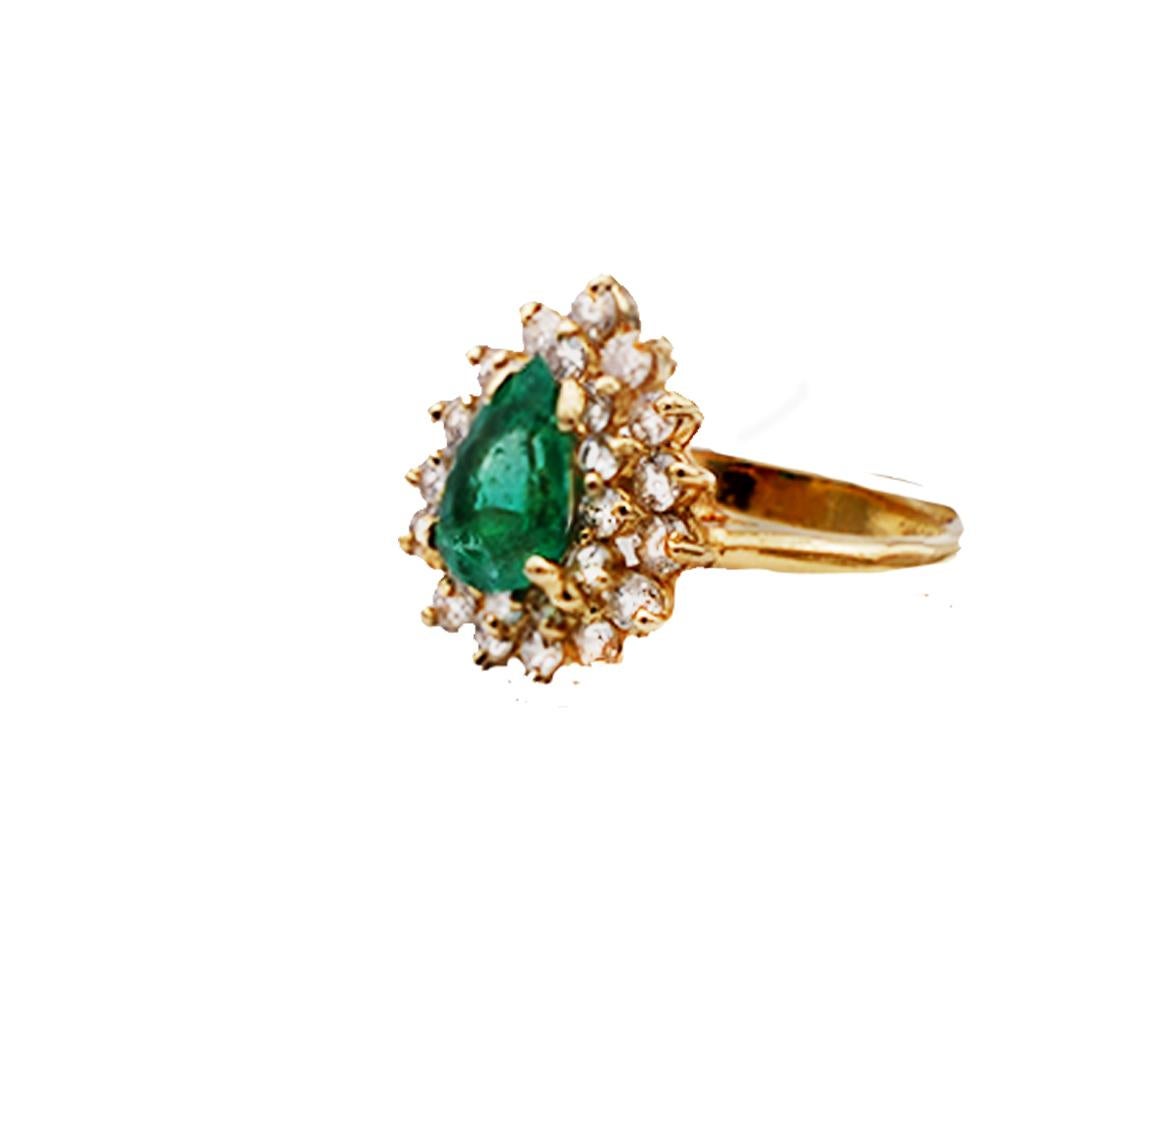 Stunning Cocktail, Pear Shaped Colombian Emerald Set in a Double Diamond Halo, 
Set in 14 Karat Yellow Gold

The pear set emerald is surrounded by a double halo of 27 prong set round brilliant diamonds. 
Rich colored, Colombian Emerald measures 9.03